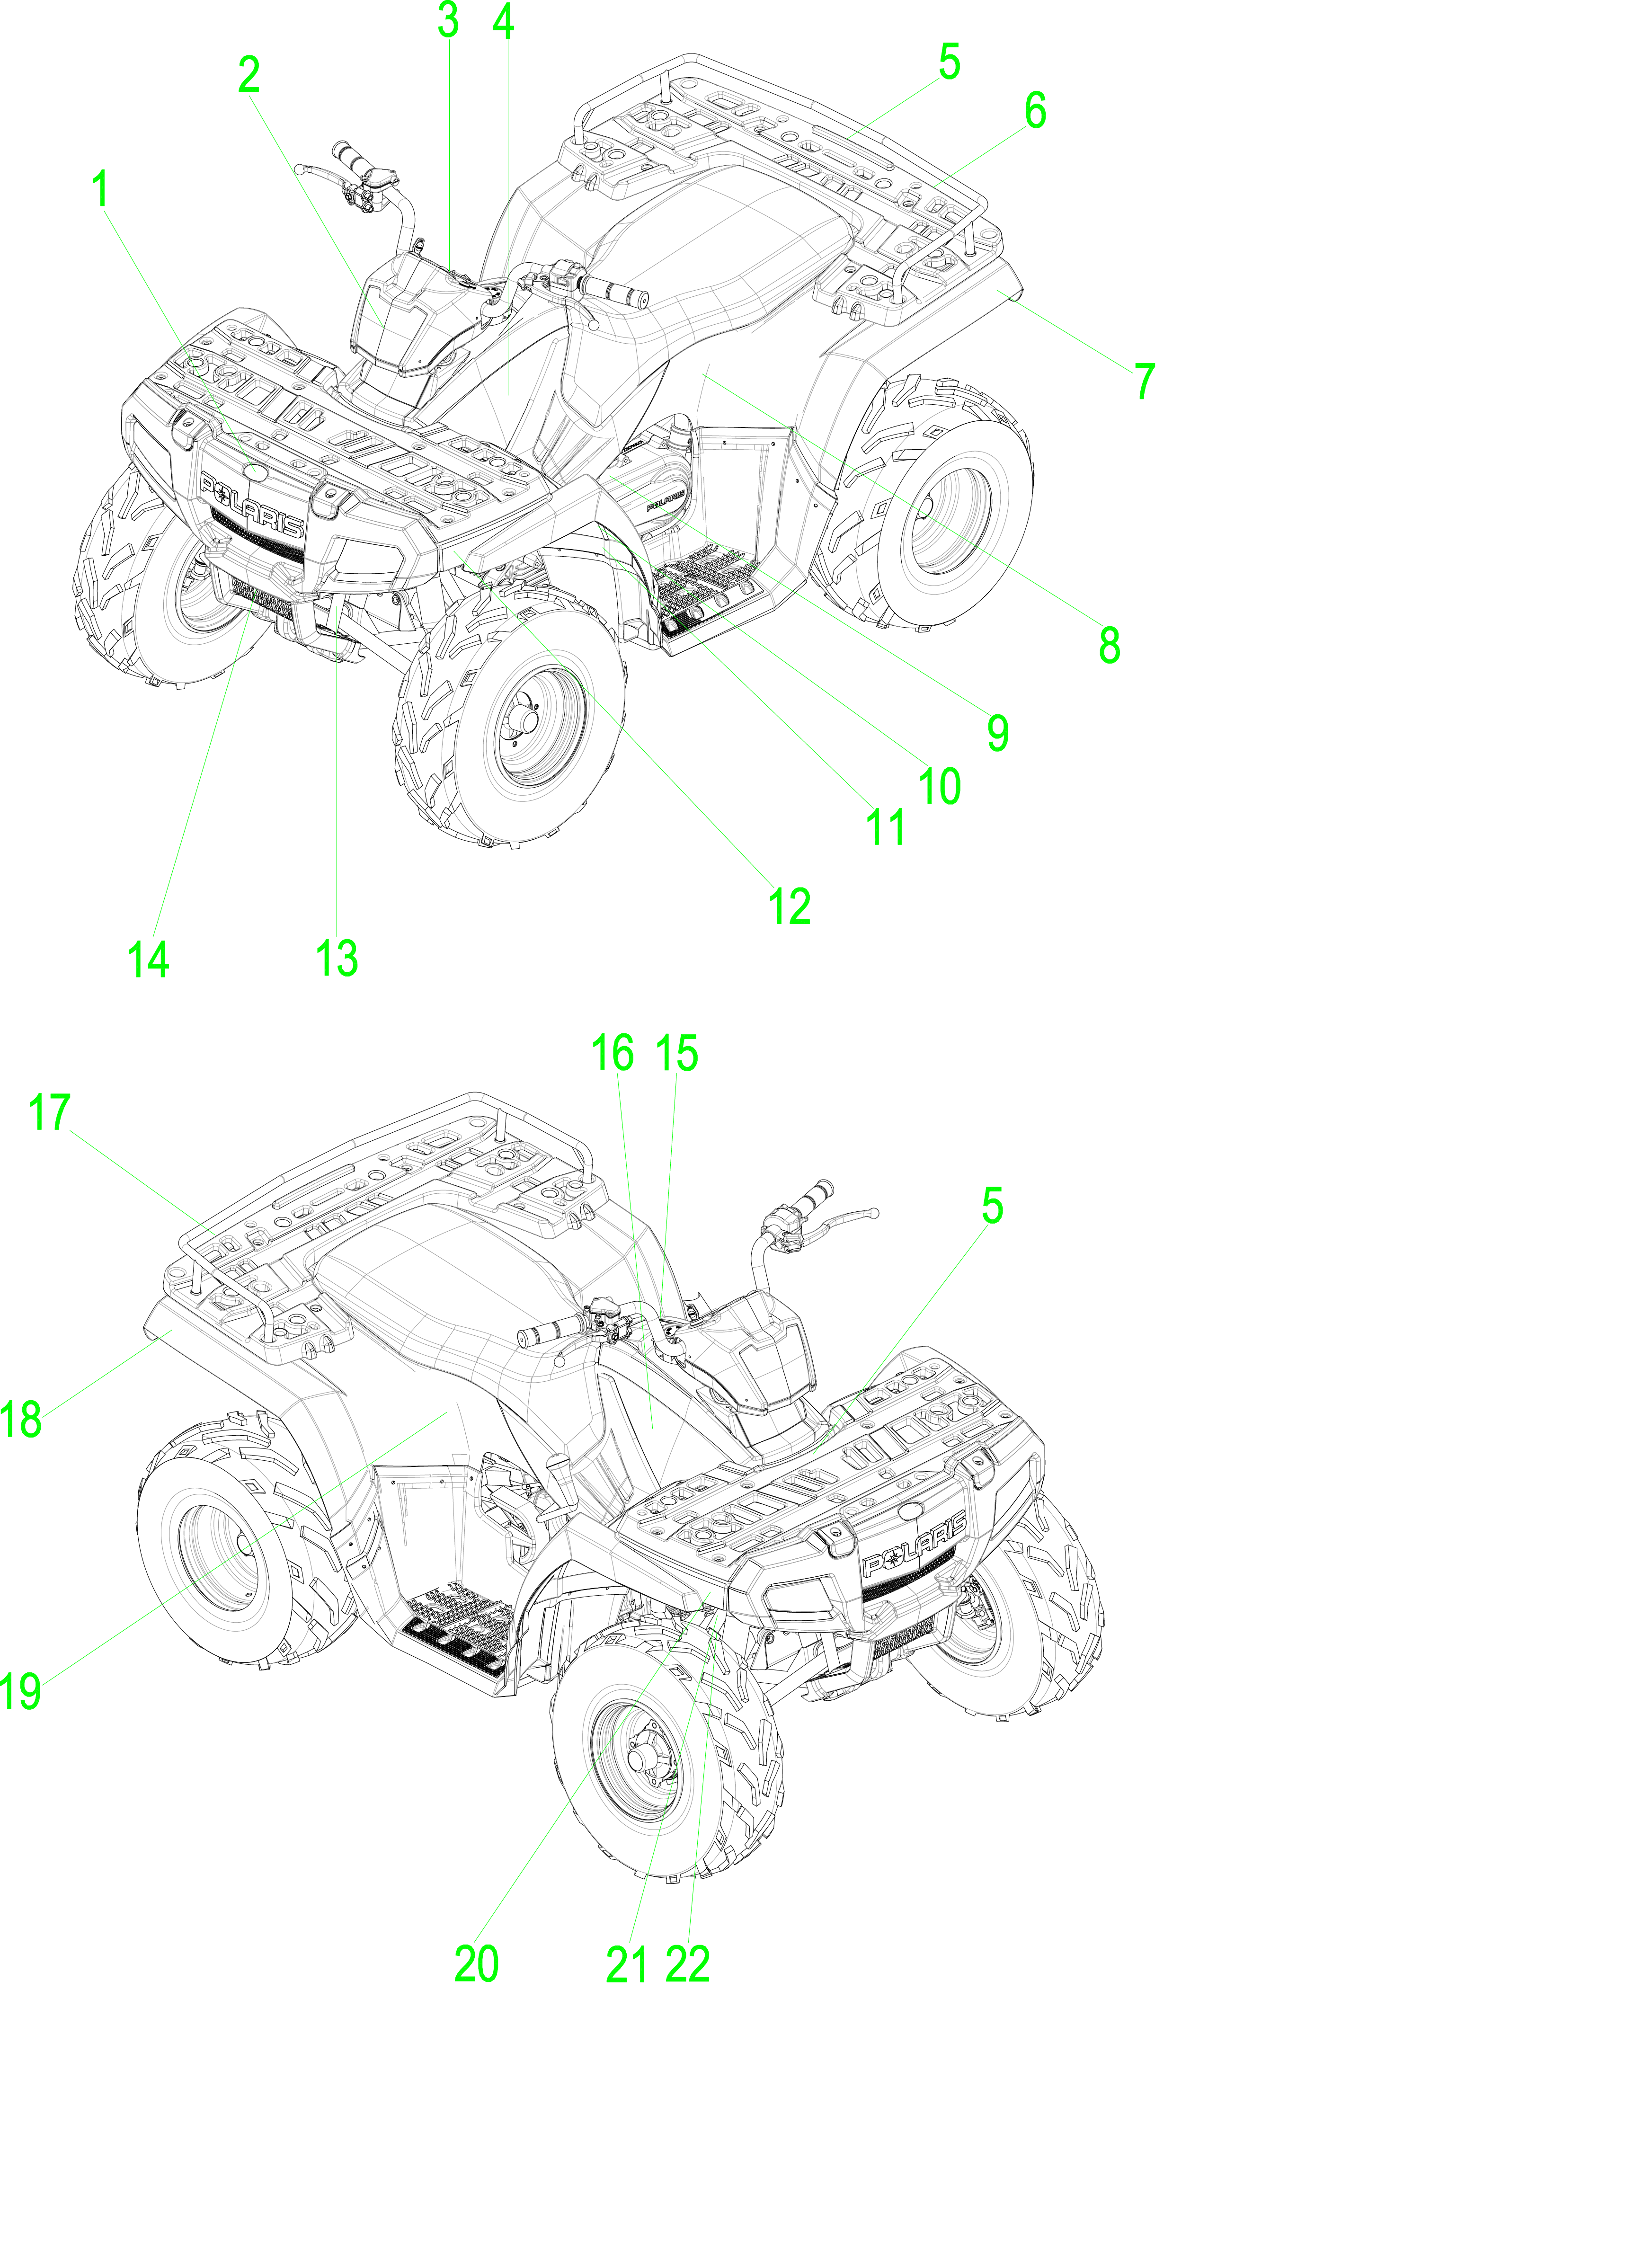 BODY DECALS - A17YAF11A5 / N5 (49ATVDECAL13SP90)